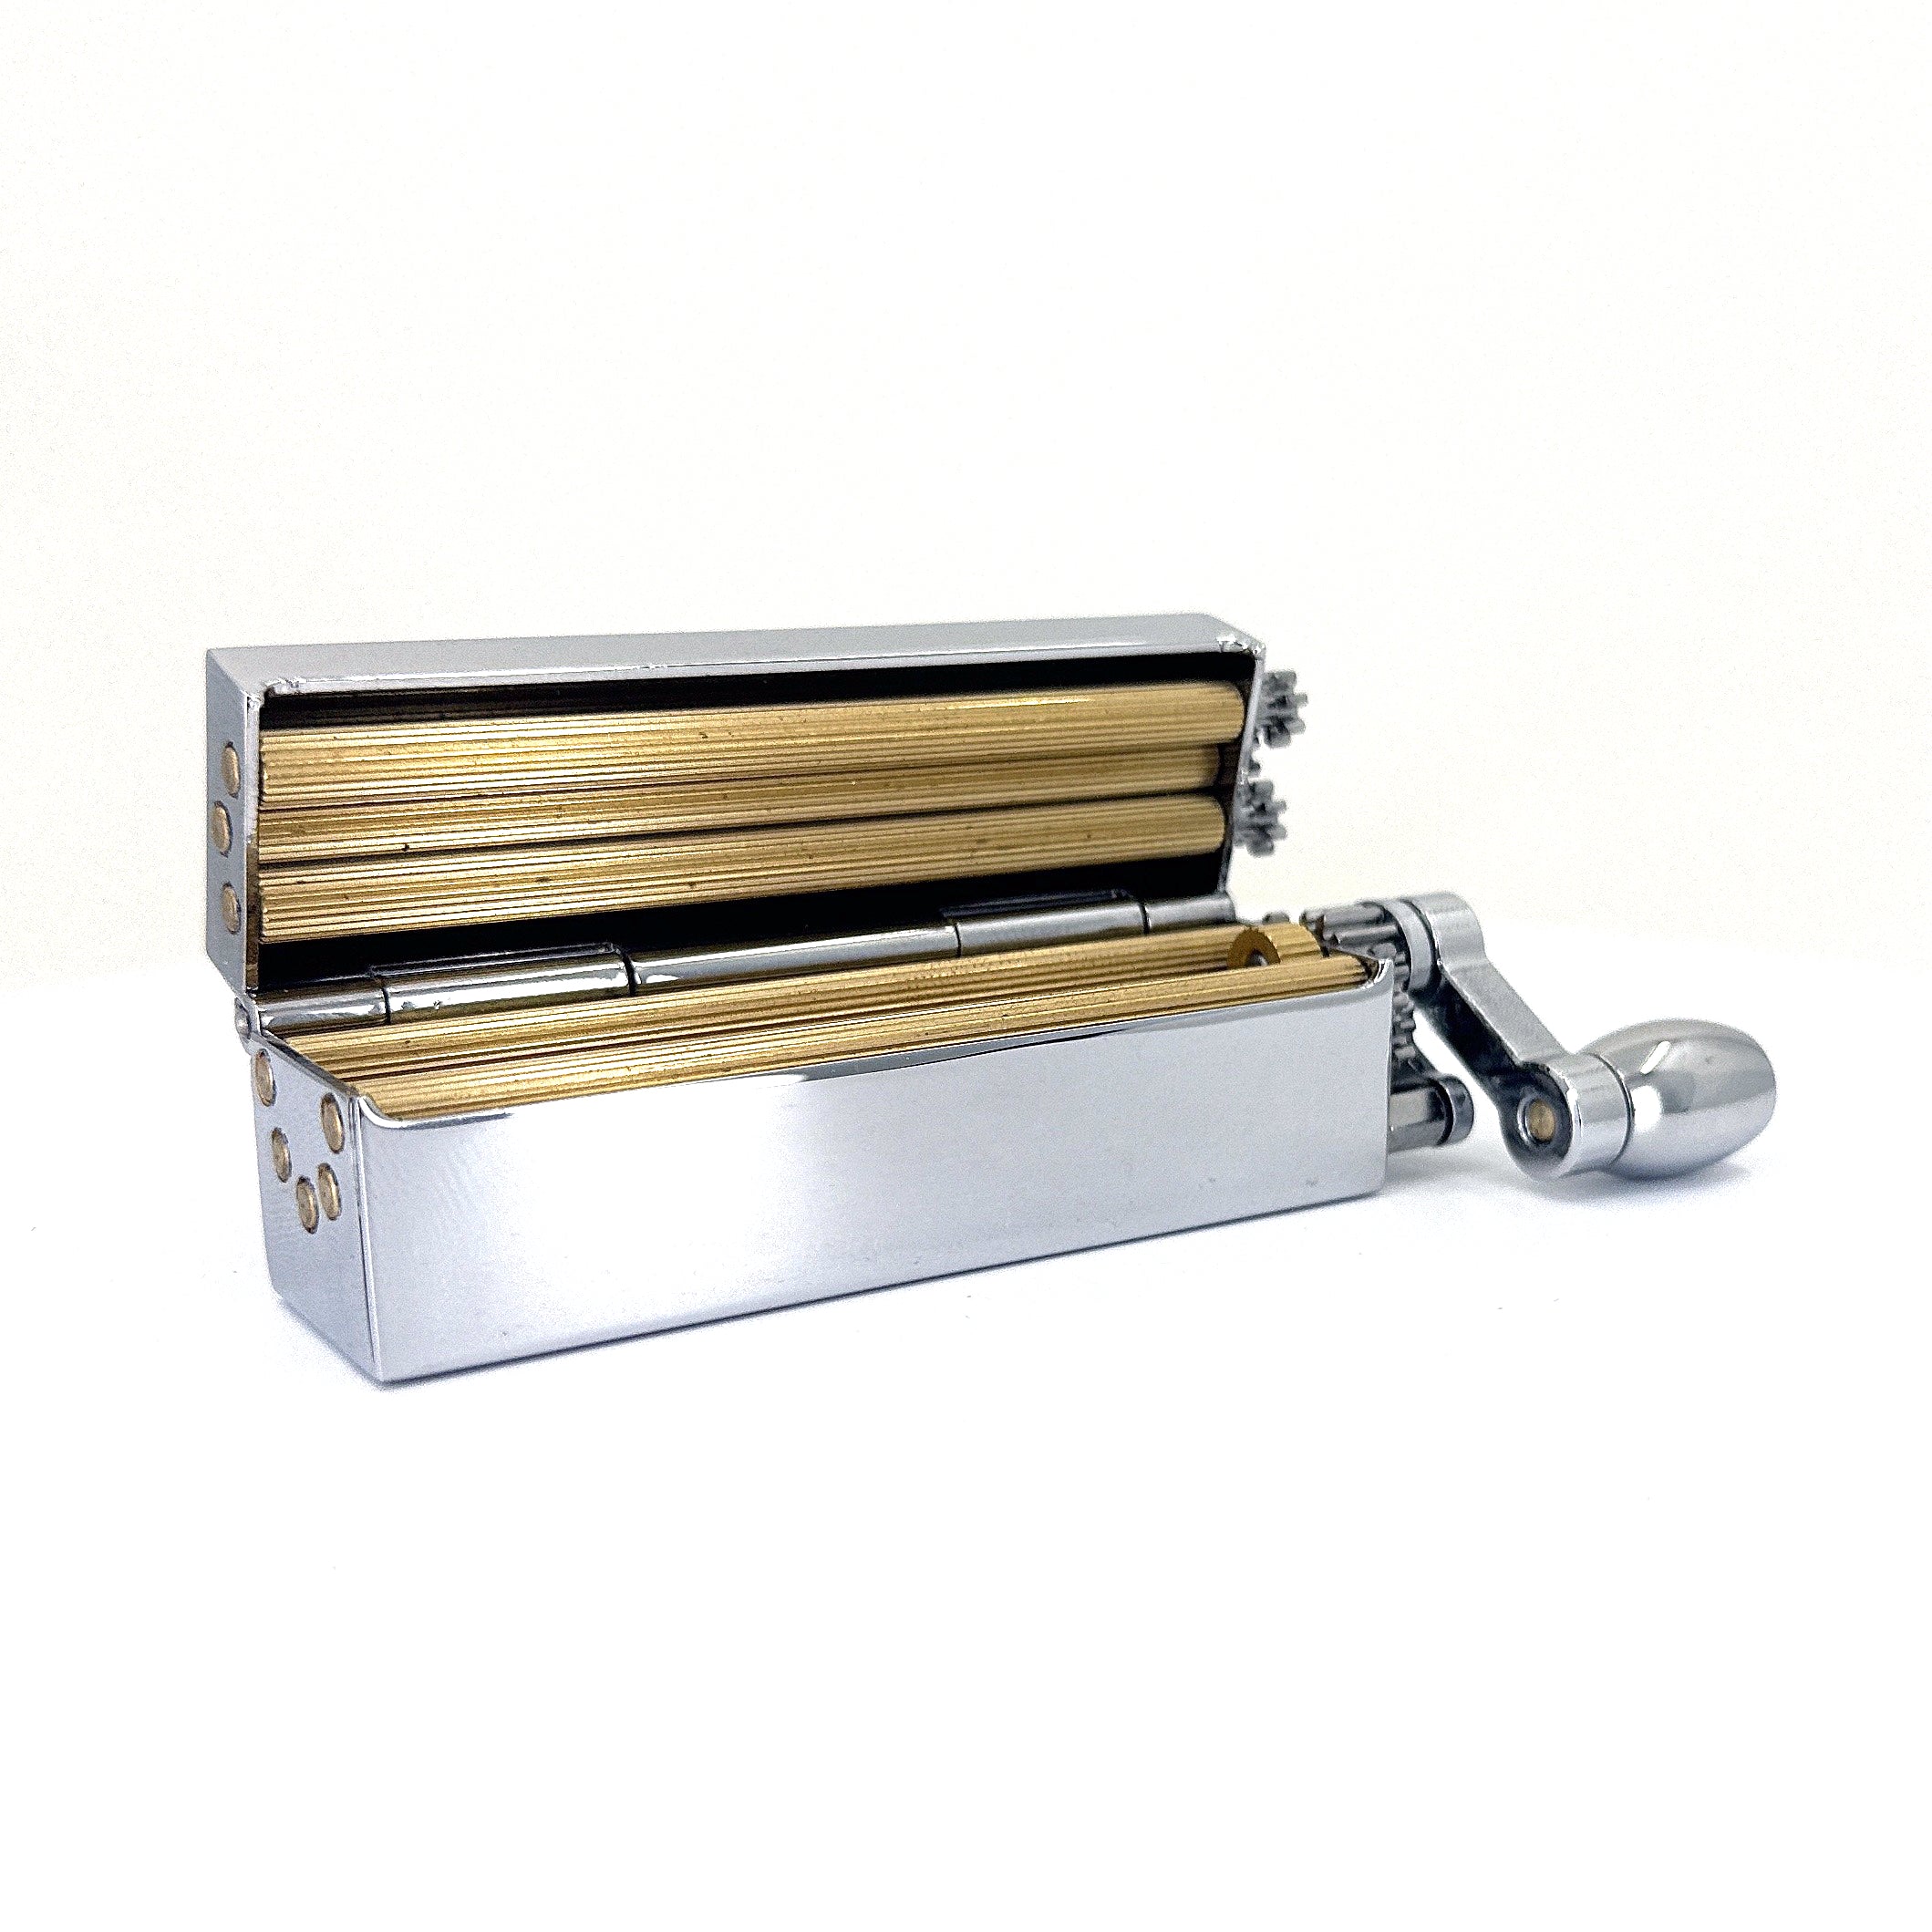 Joint roller with gold inner and silver outer chrome huey manual cigarette rolling machine.